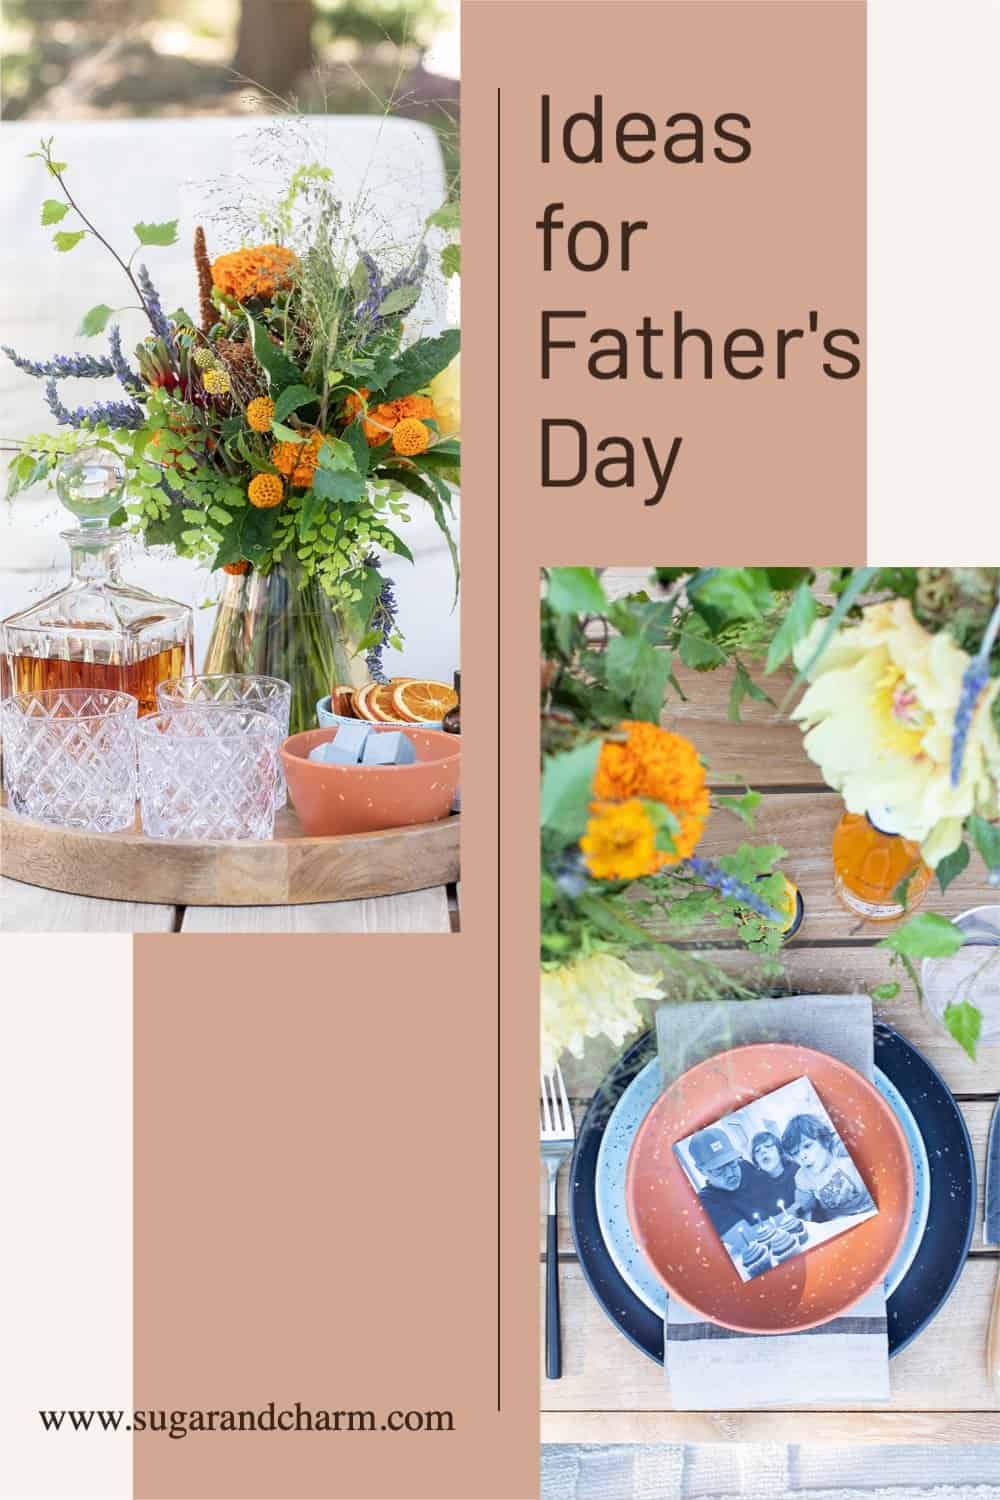 Ideas for Father's Day 